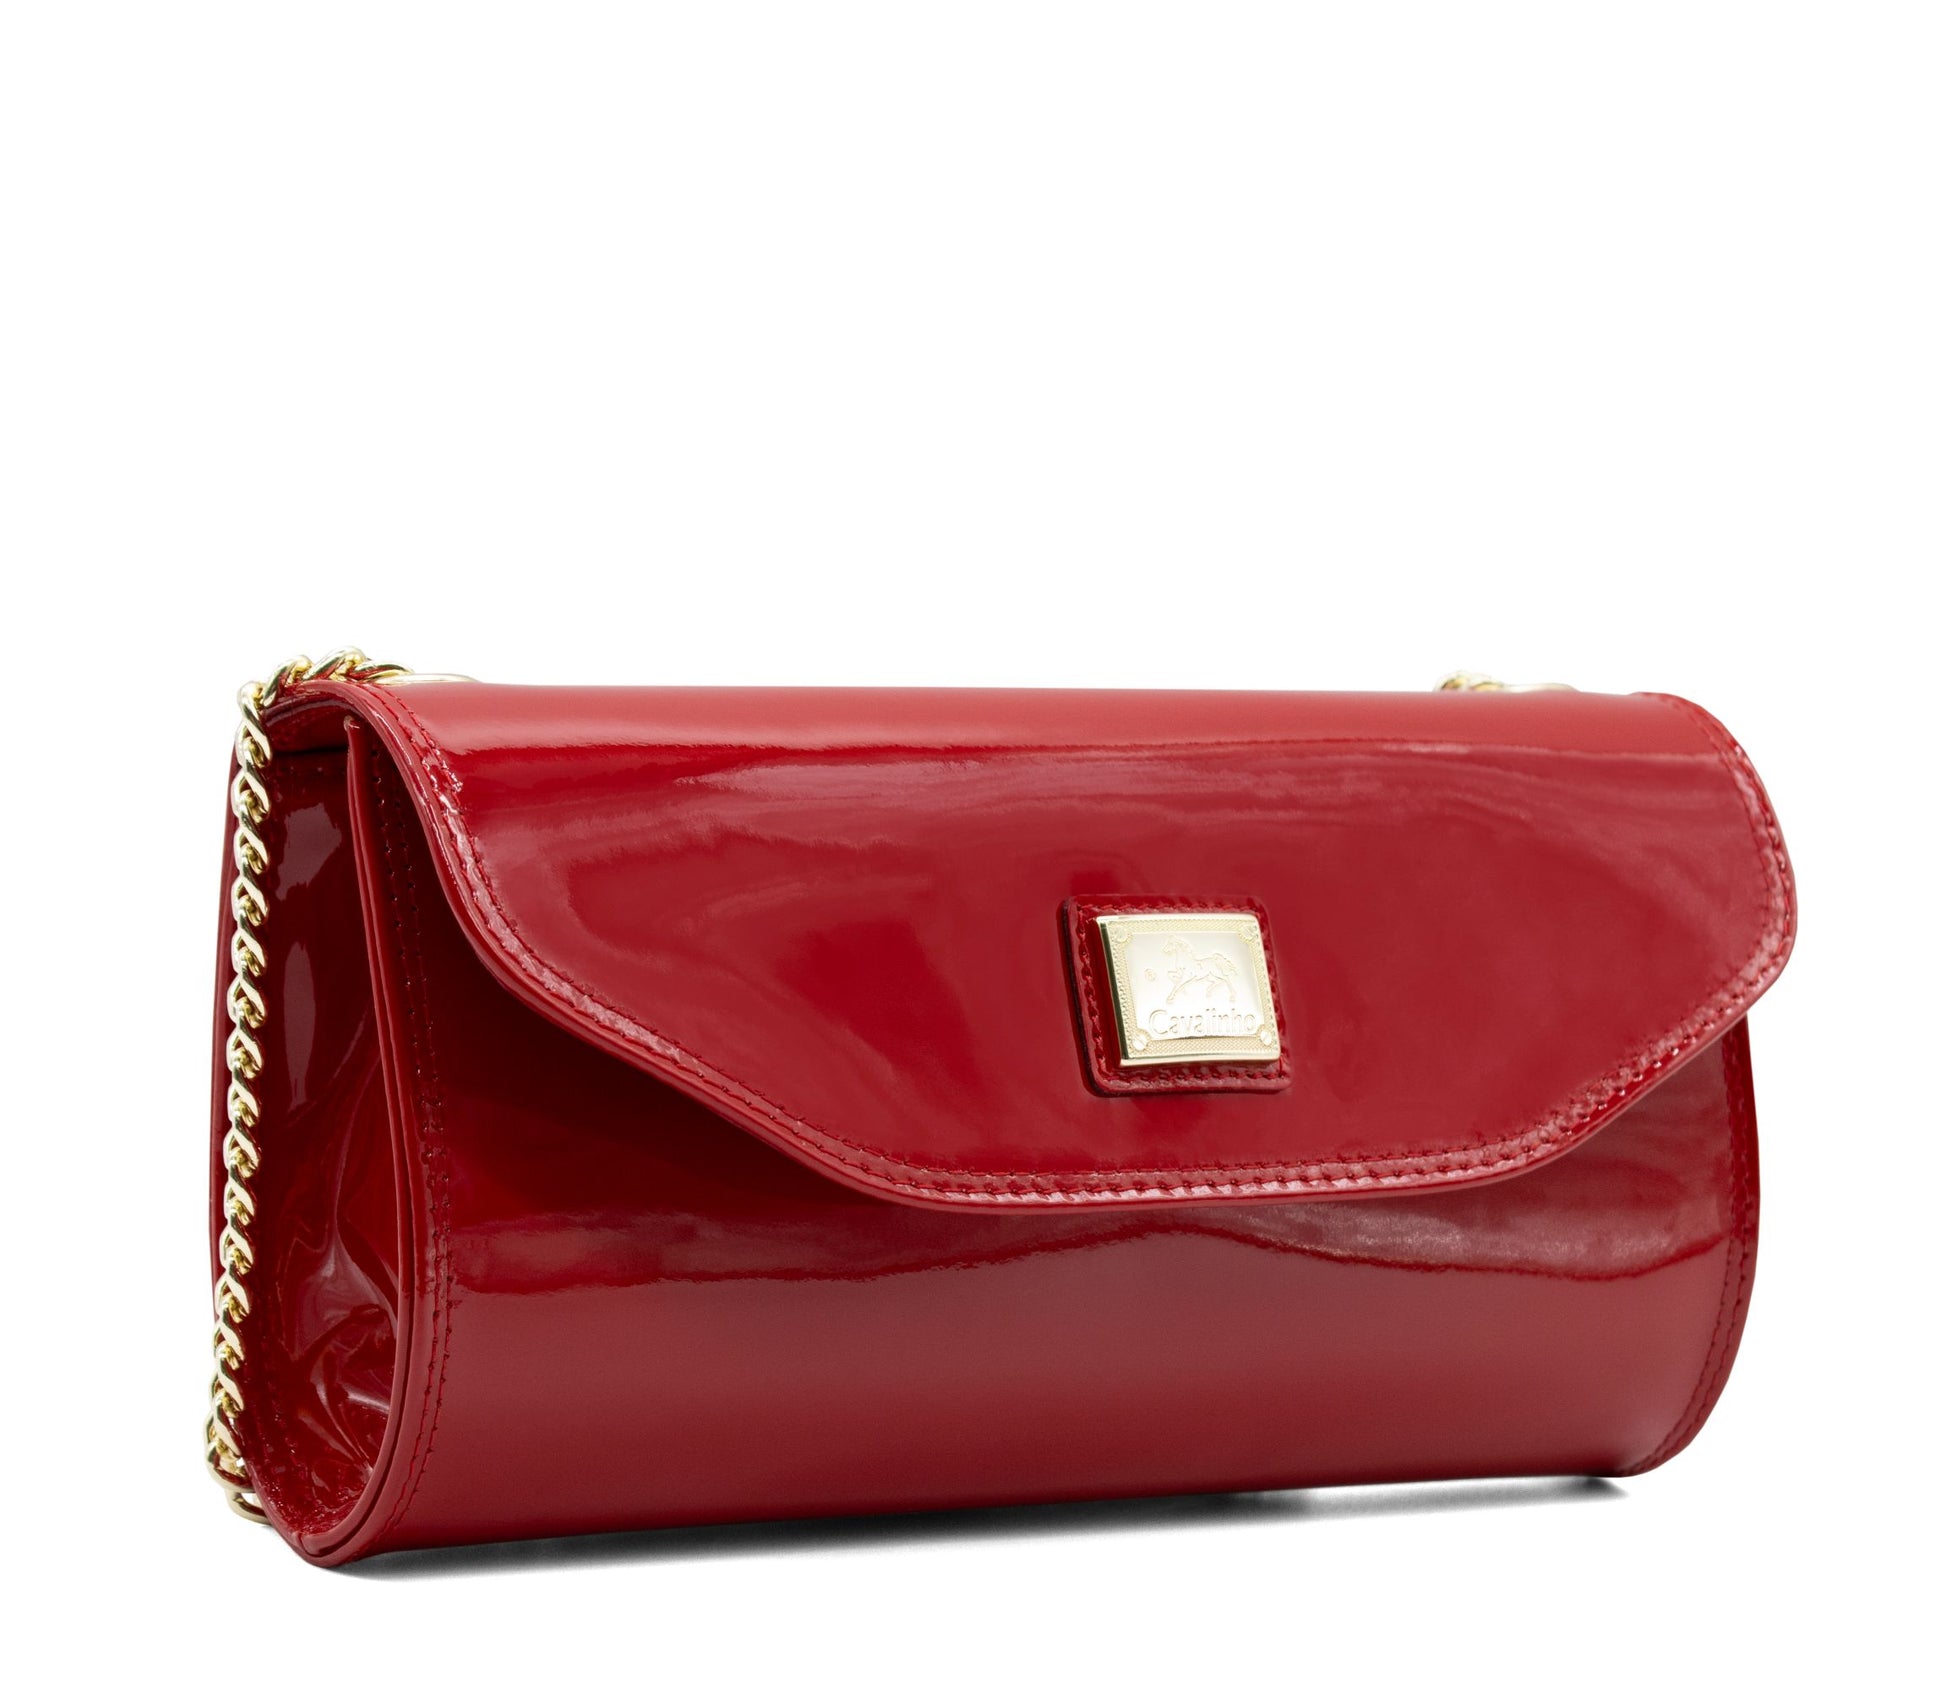 Cavalinho All In Patent Leather Clutch or Shoulder Bag - Red - 18090491.04_2